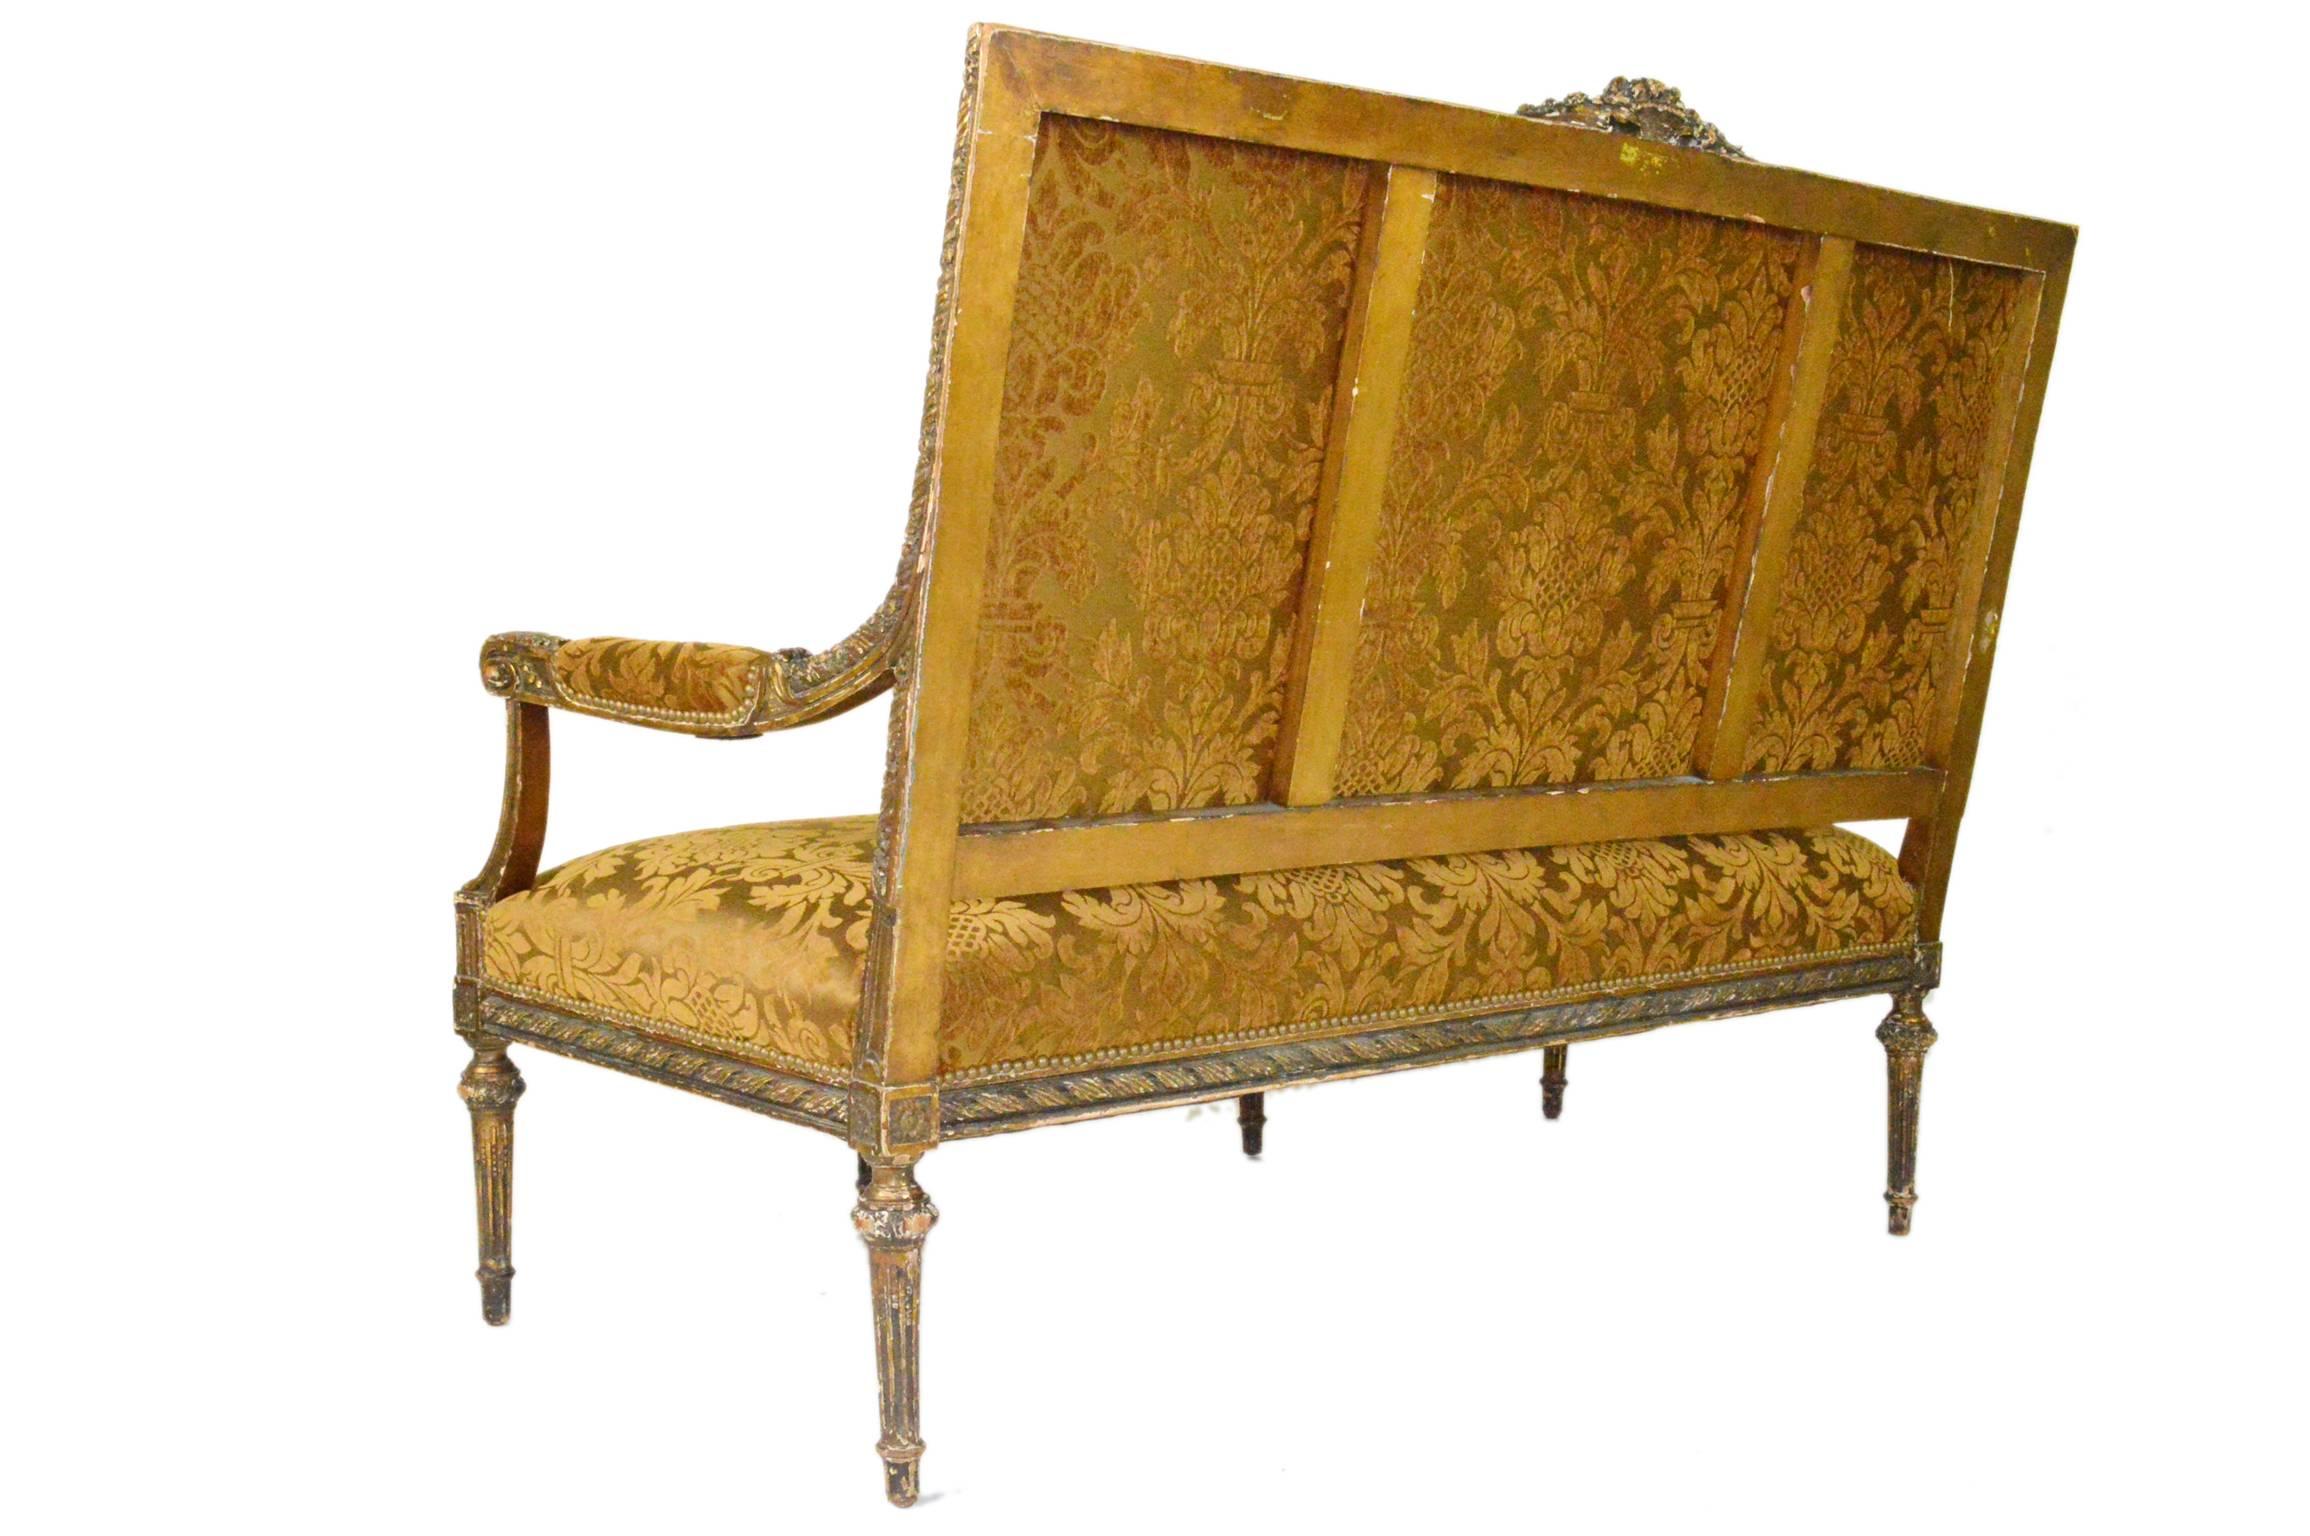 Wood 19th Century French Louis XVI Style Carved Painted Gilt Settee For Sale